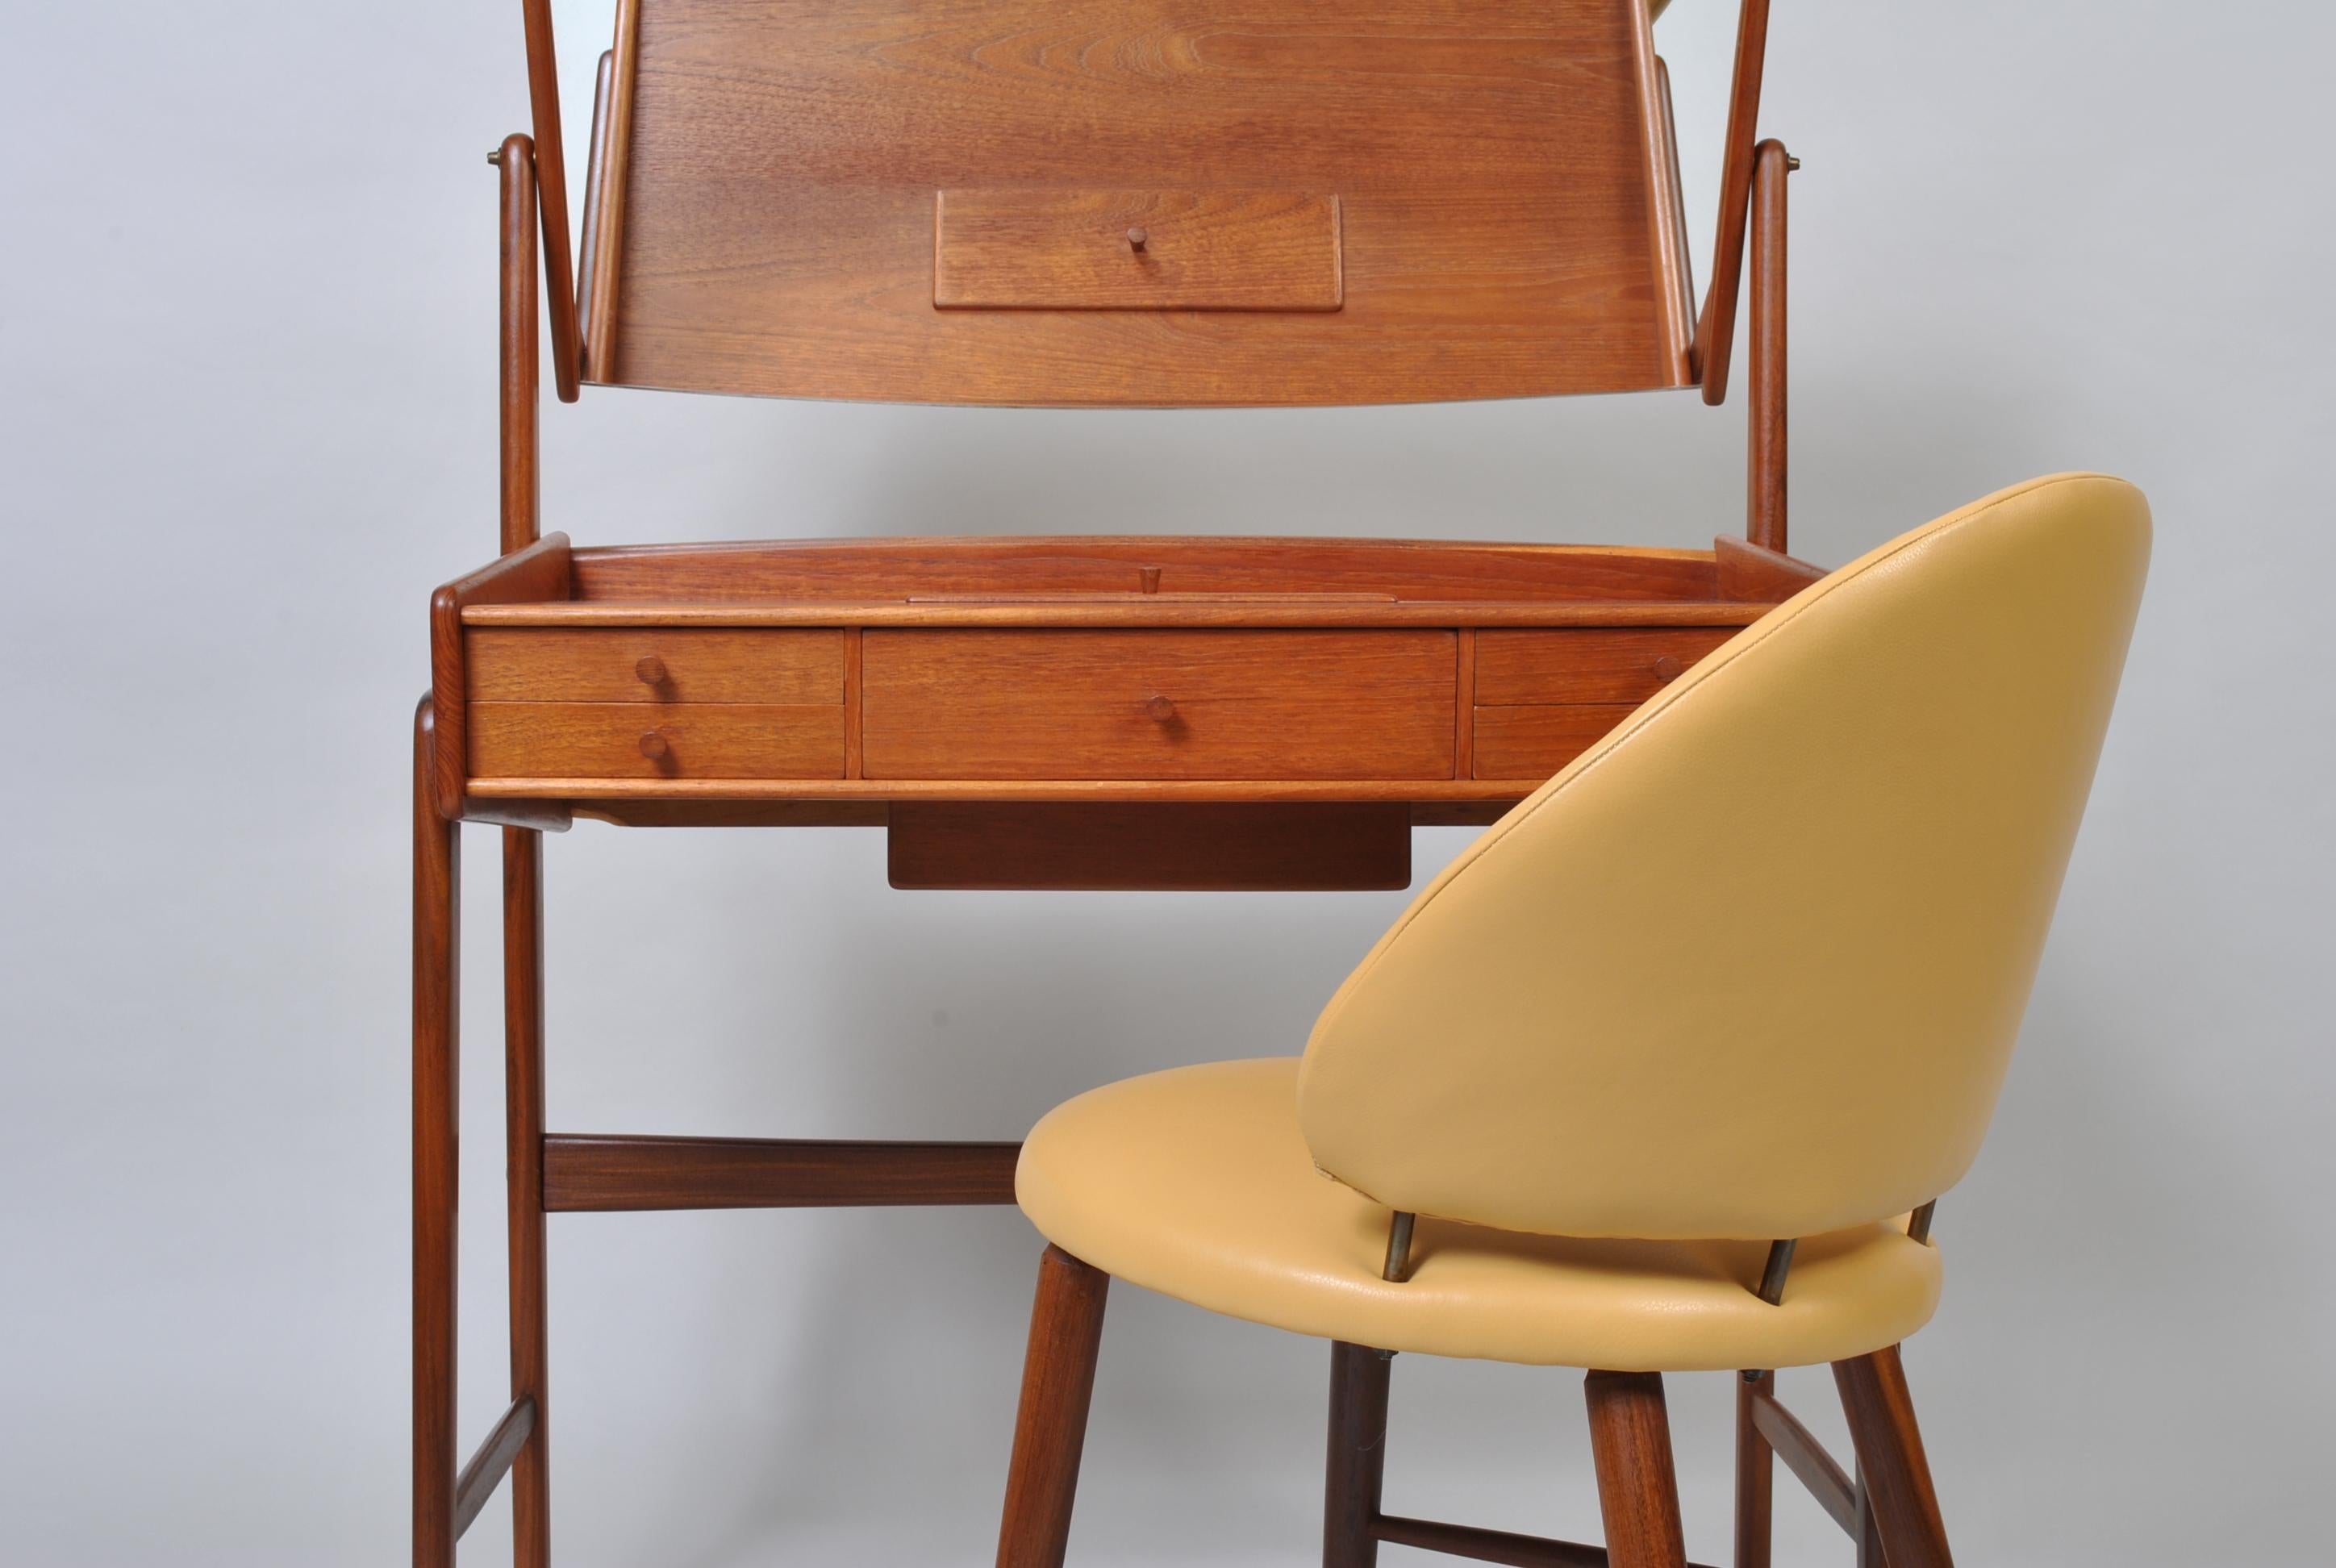 An unusual Danish midcentury vanity table & matching chair by Svend Aage Madsen. The vanity or dressing table is constructed from teak with various small drawers and a lidded compartment within the surface. The original chair has been fully